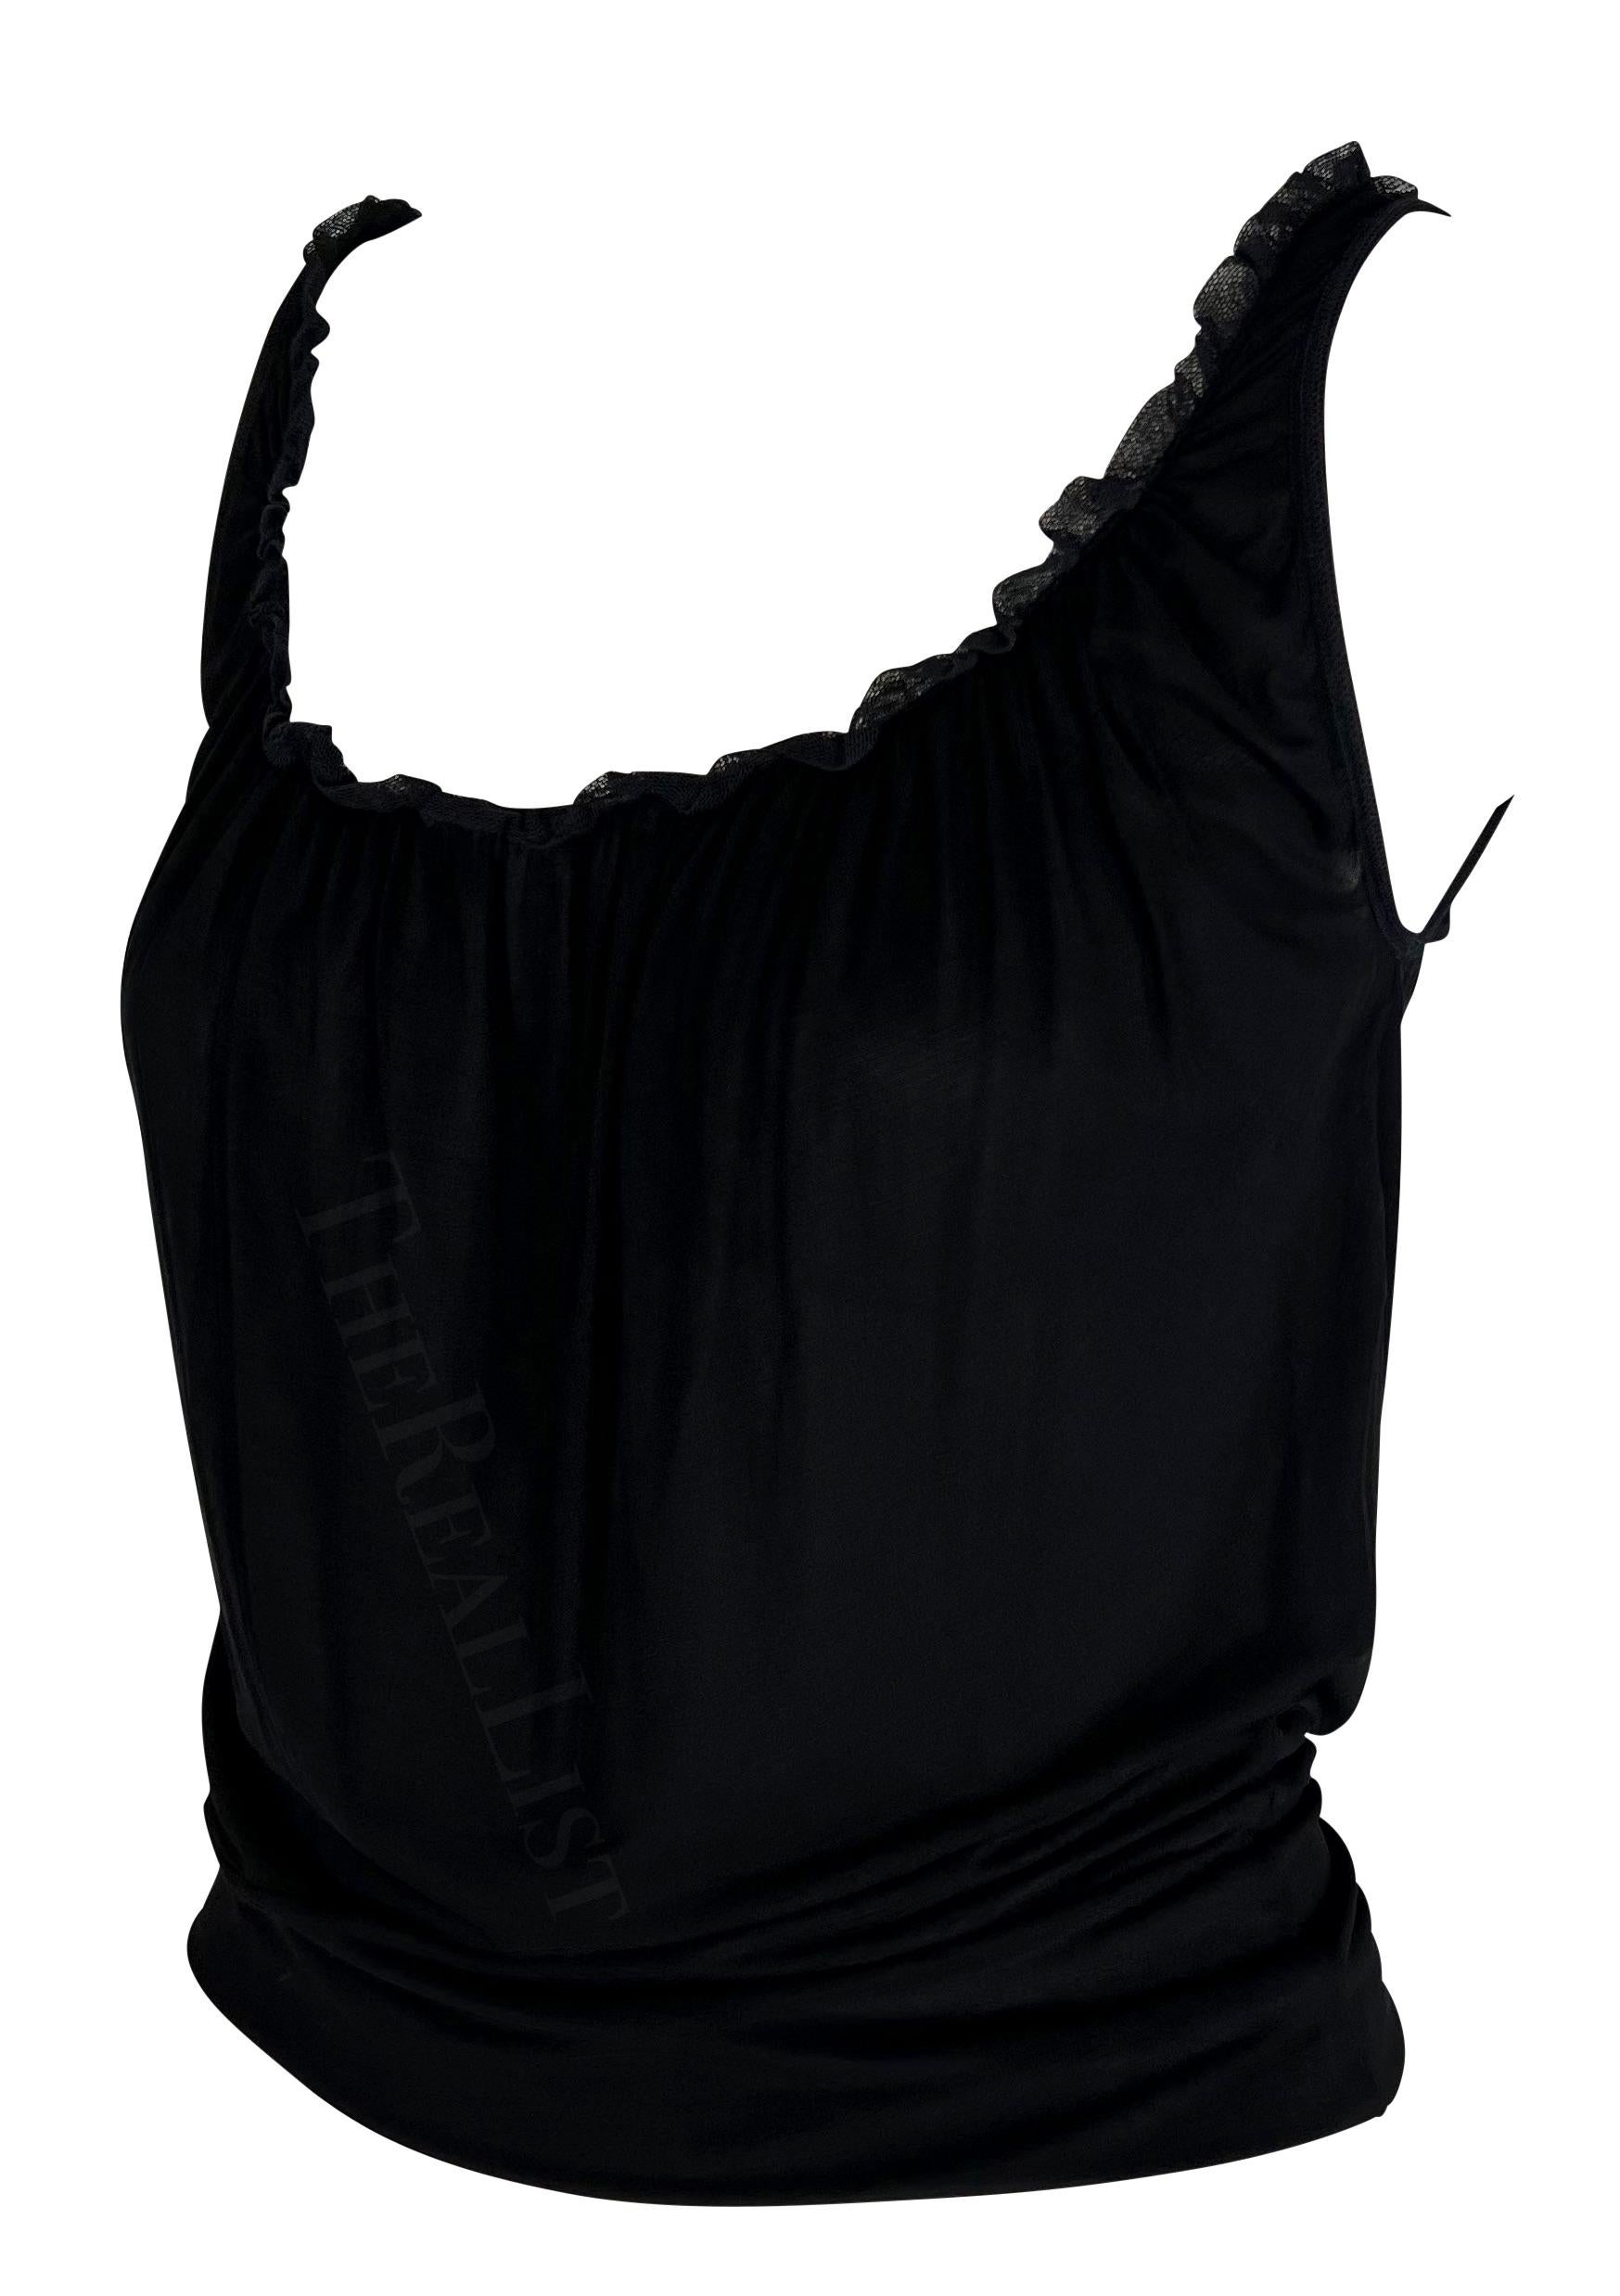 TheRealList presents: a fabulous black Gucci ruffle tank top, designed by Tom Ford. From the early 2000s, this chic black tank top features a wide scoop neckline accented with a short ruffle trim. Add this perfectly elevated Gucci by Tom Ford